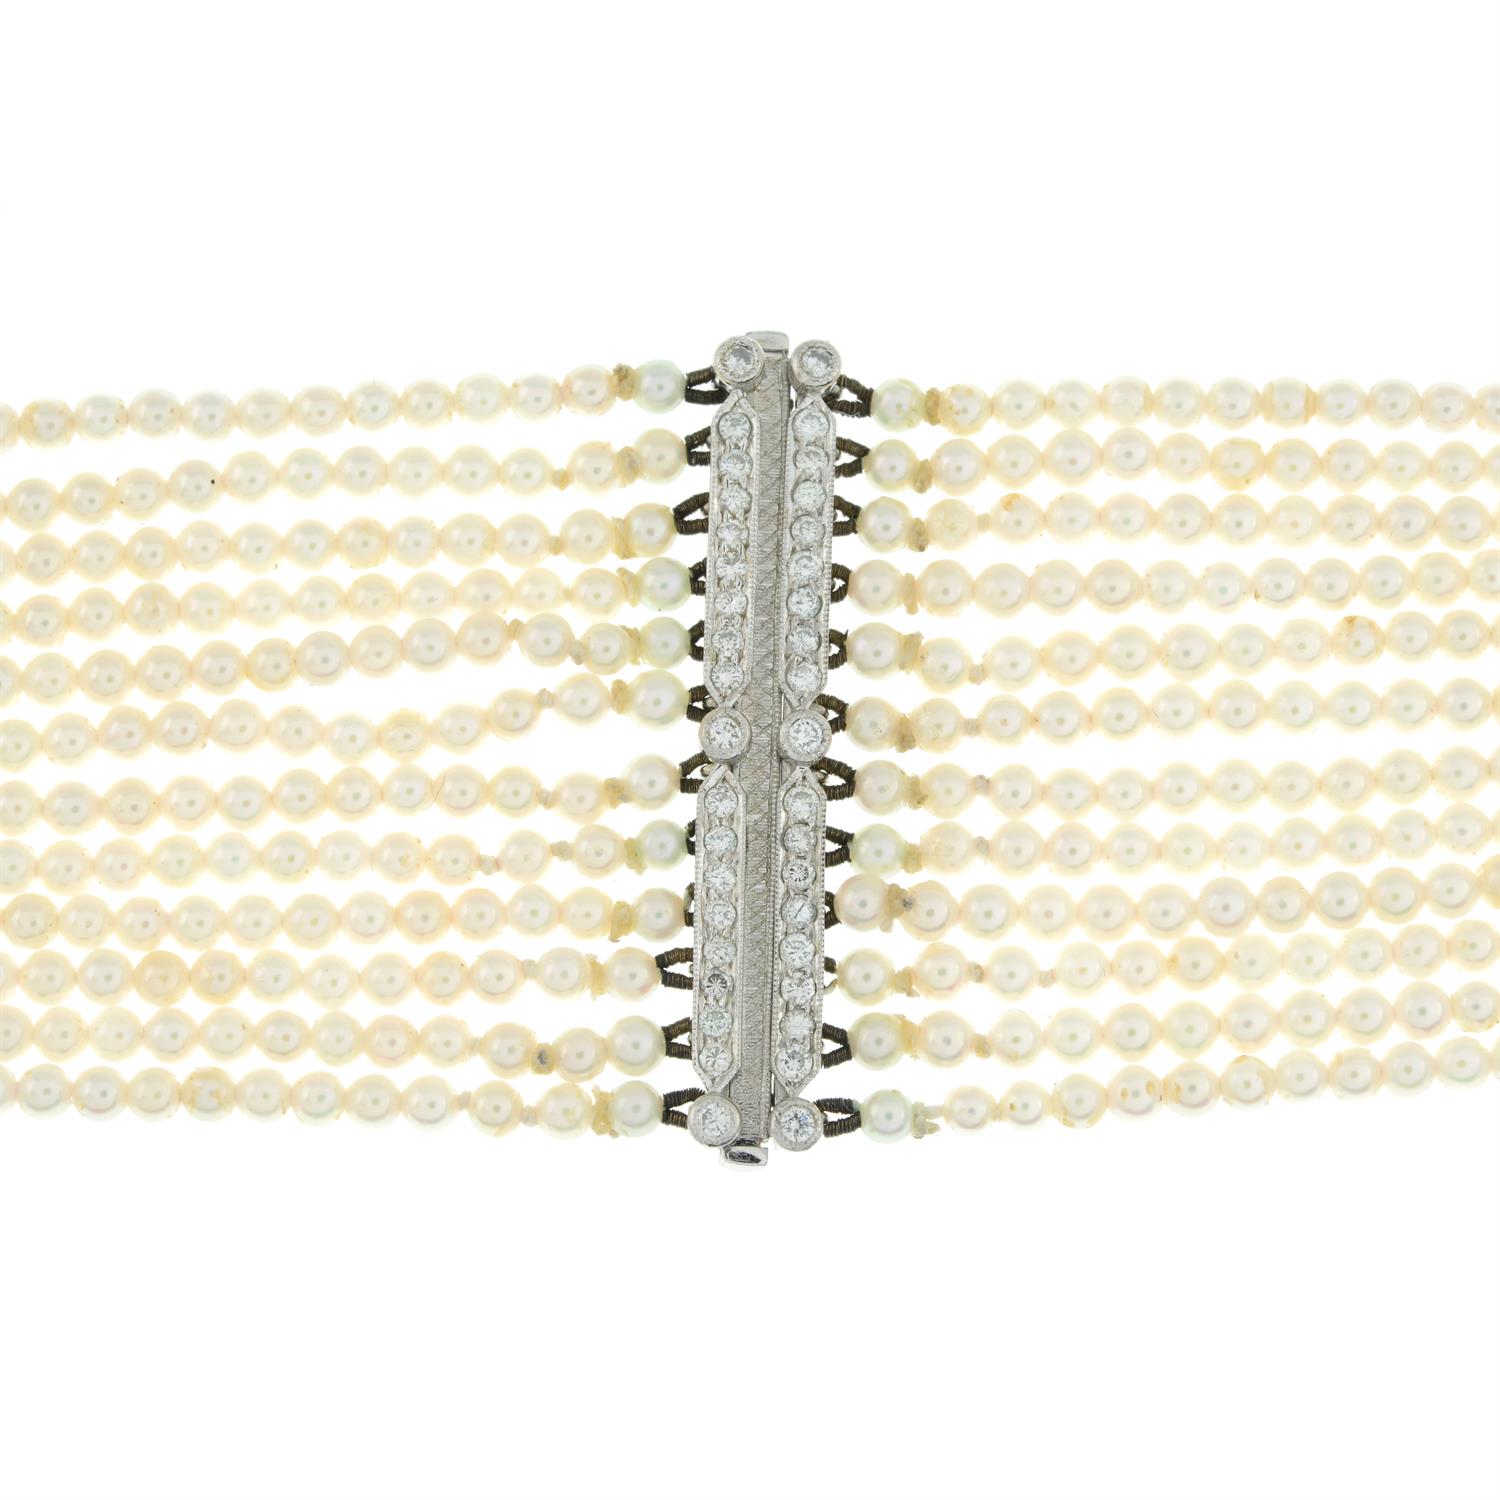 Seed pearl and diamond choker necklace, by Adler - Bild 4 aus 6